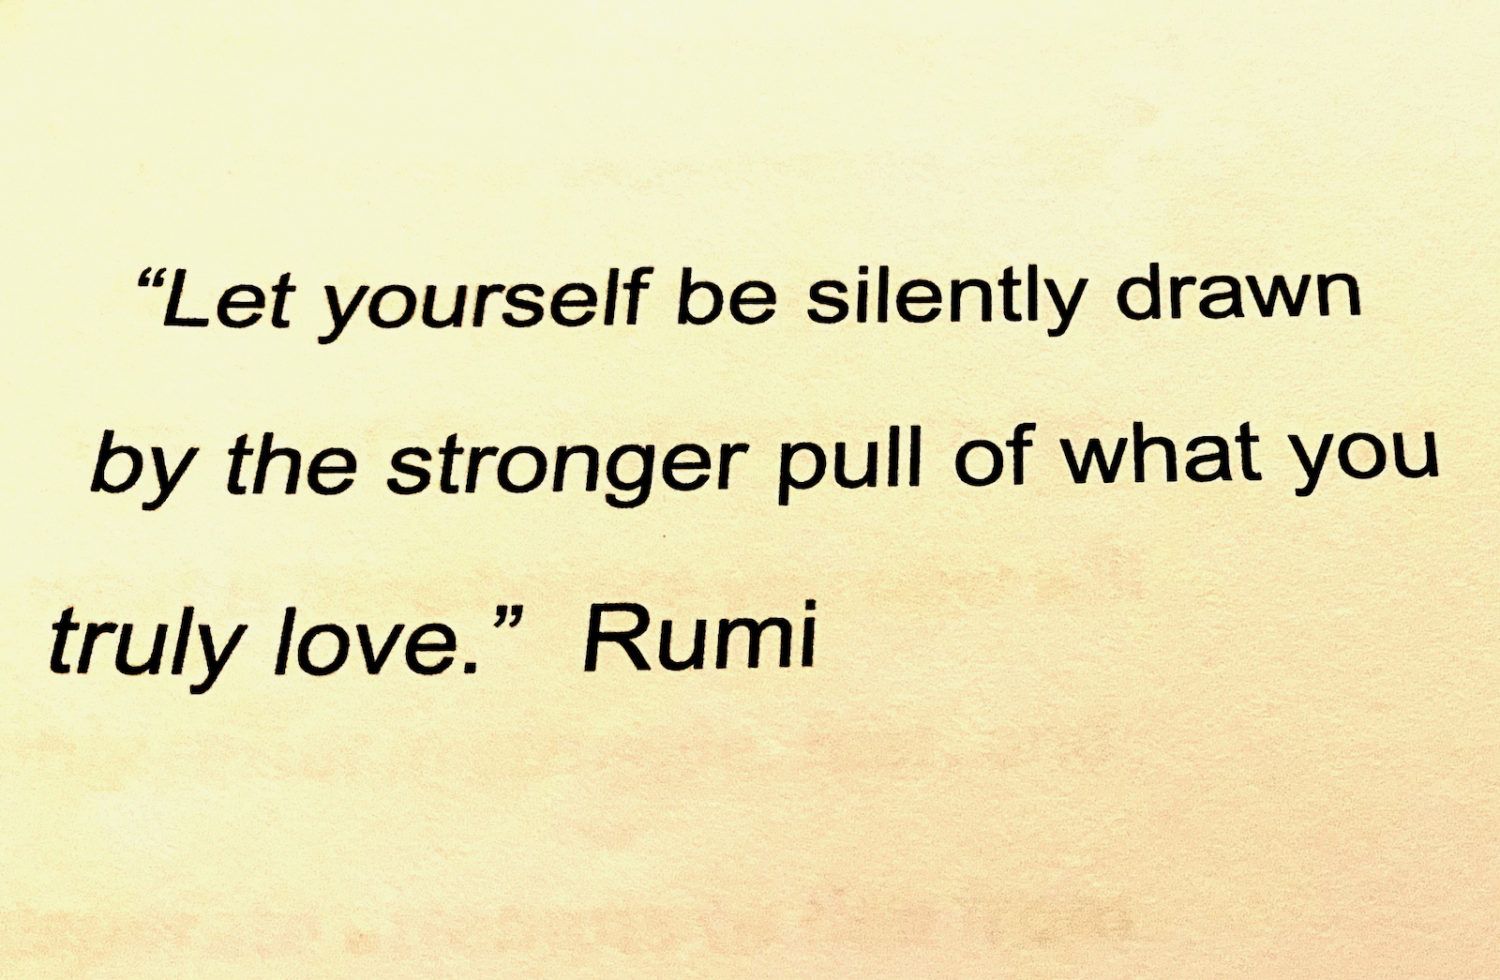 "Let yourself be silently drawing by the stronger pull of what you truly love." - Rumi